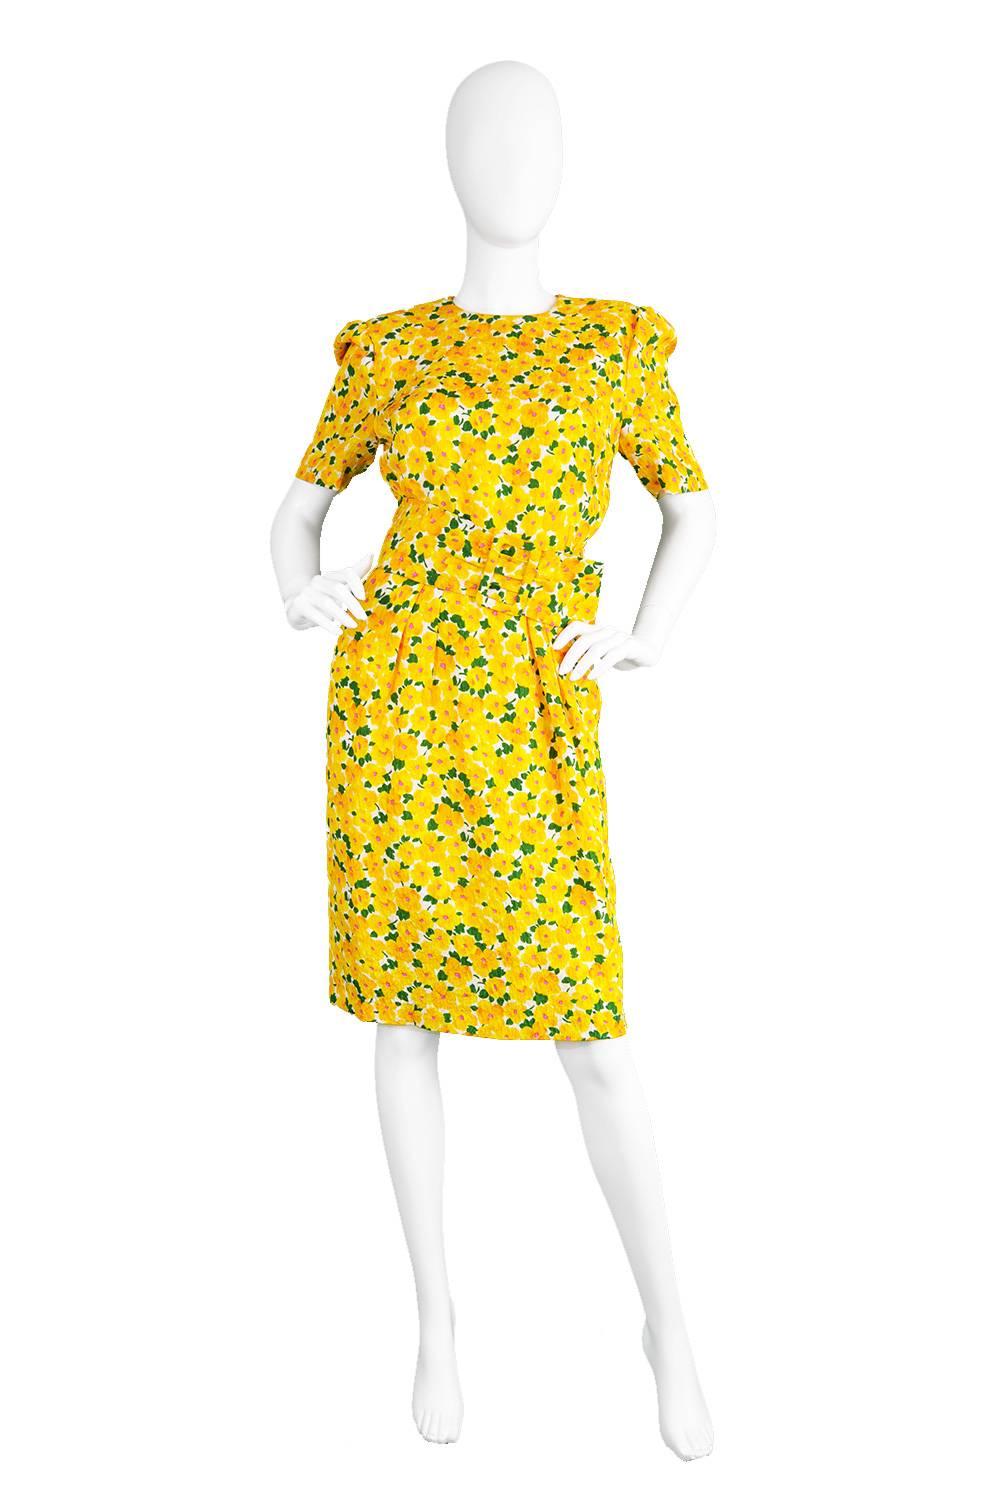 A fun and feminine number from the 1980s by British couturier and royal dressmaker, Hardy Amies. In a textured silk fabric with a bold, summery print throughout of yellow and orange watercolour daisies. Perfect for wearing to a countryside tea party